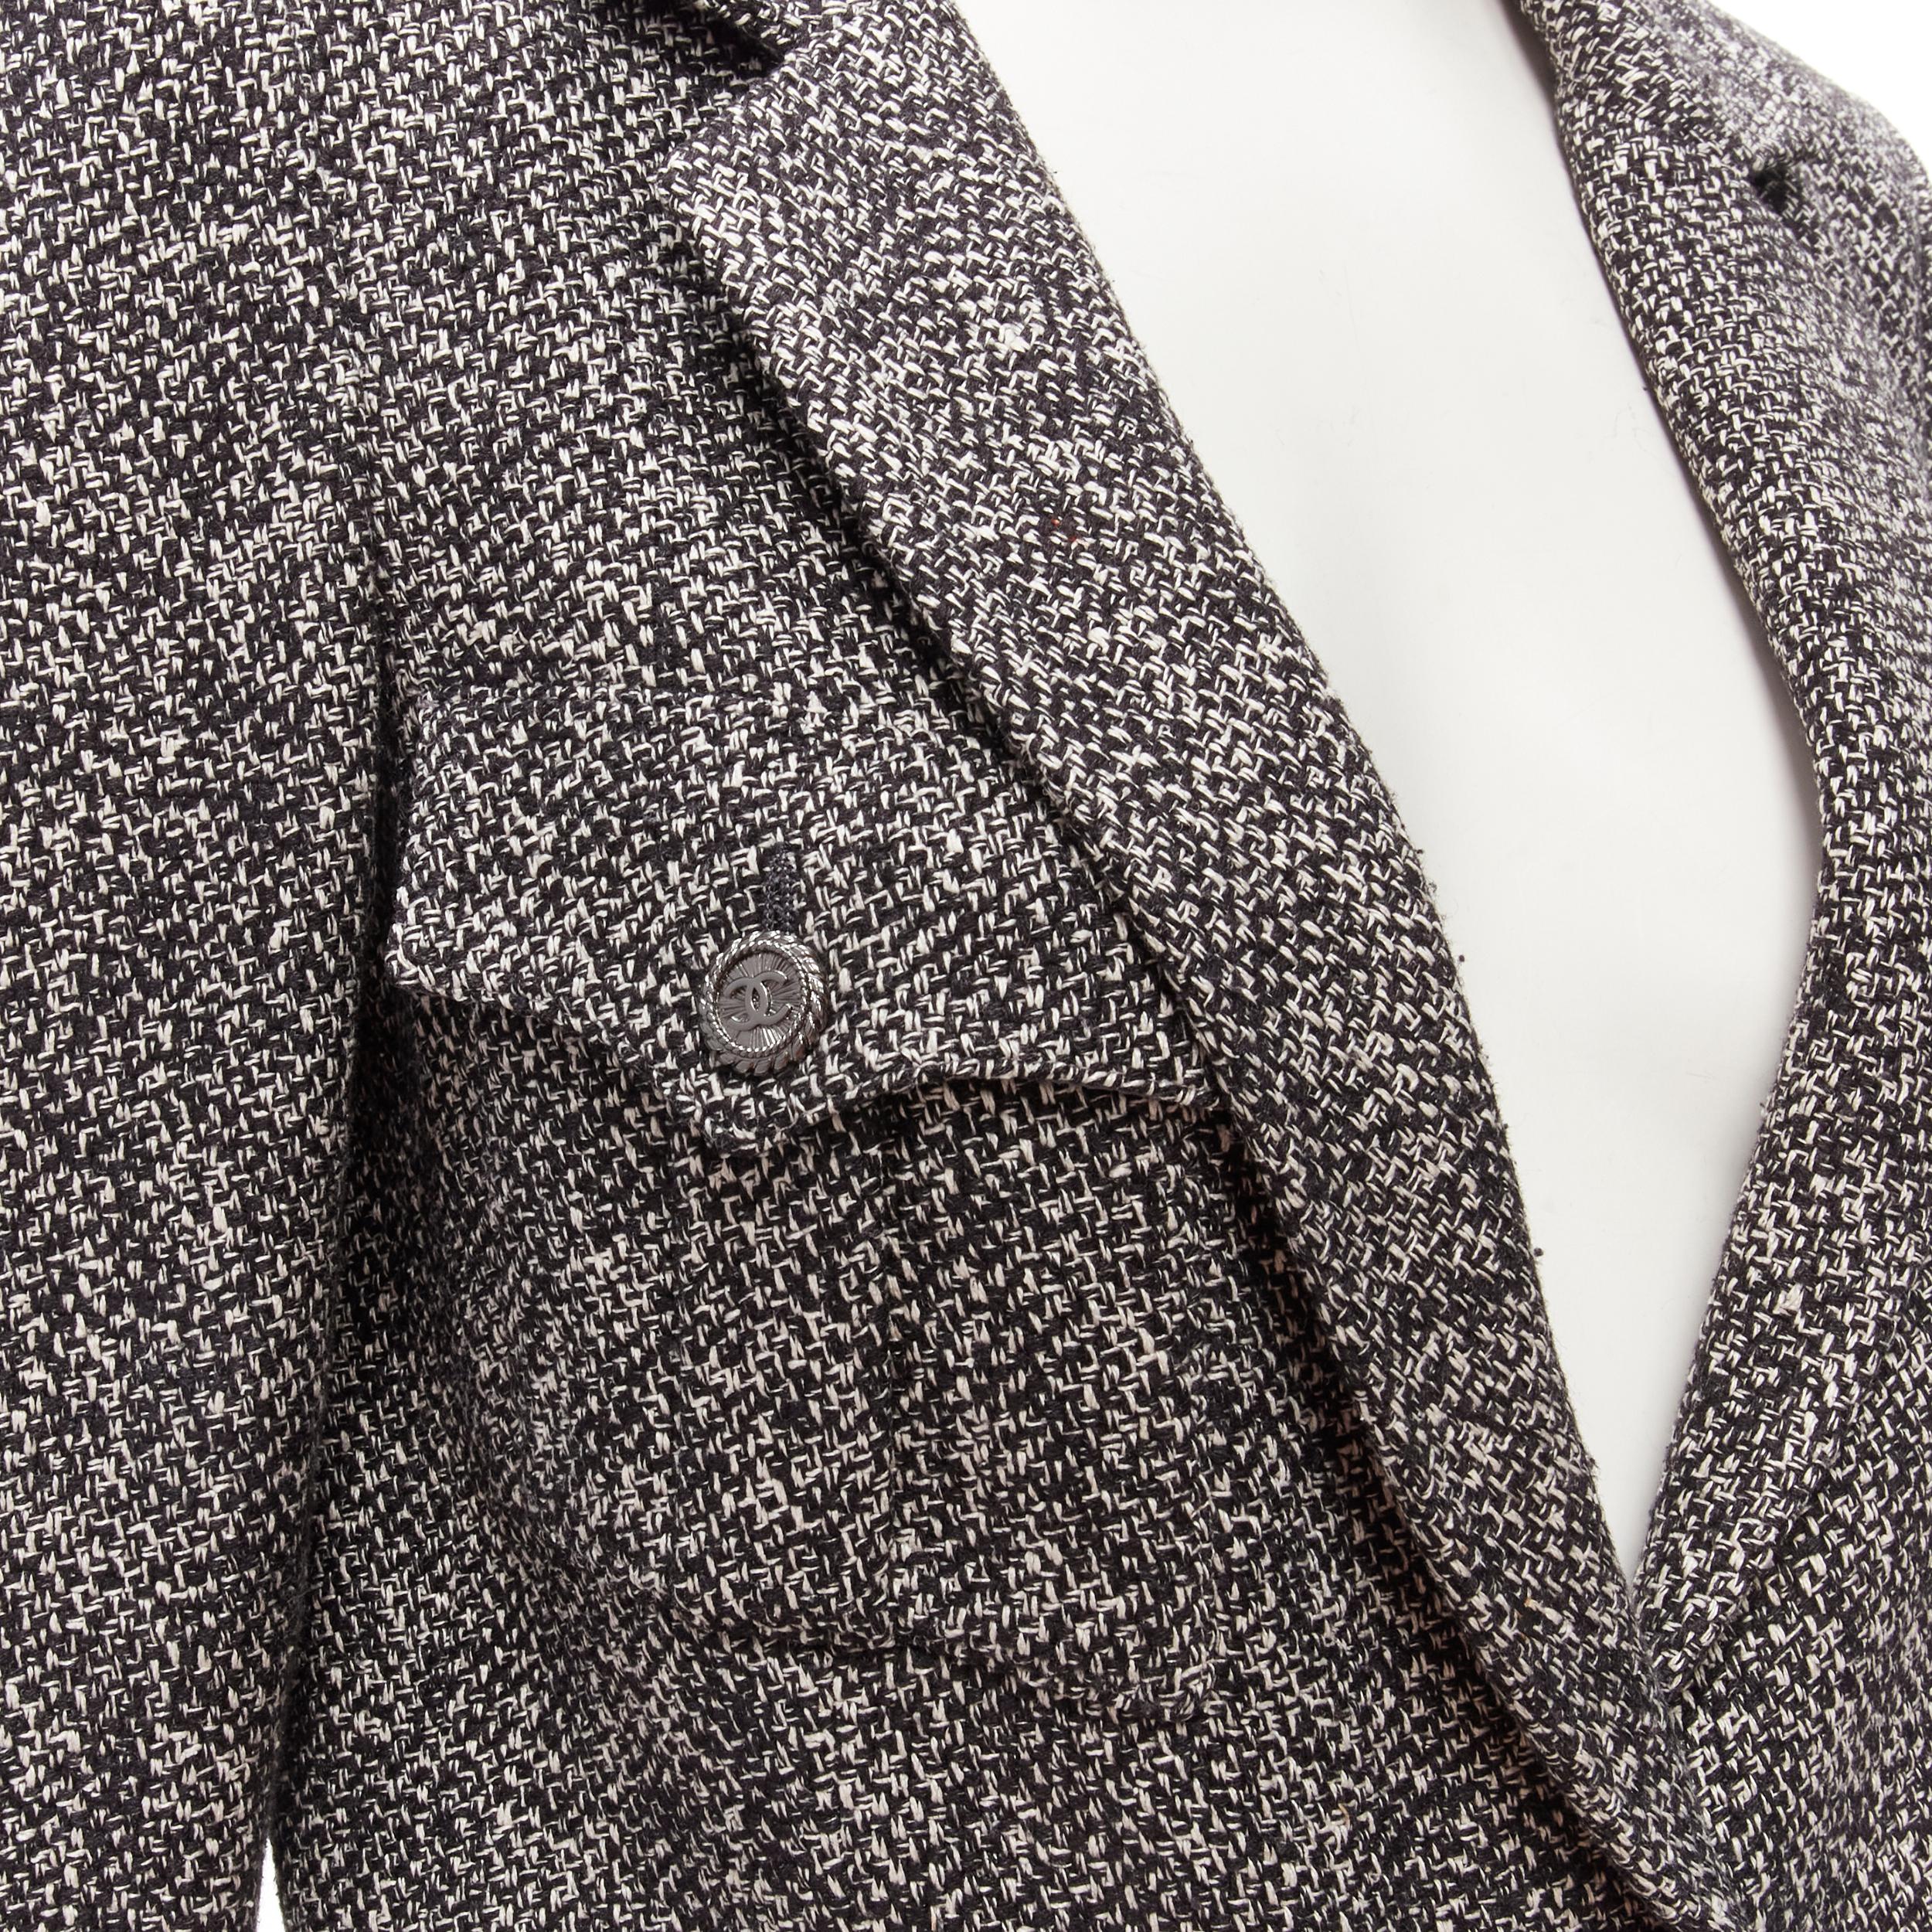 CHANEL 07P CC logo button grey tweed 4 pockets military blazer FR38 M
Reference: TGAS/C01957
Brand: Chanel
Designer: Karl Lagerfeld
Collection: 07P
Material: Silk
Color: Grey
Pattern: Solid
Closure: Button
Lining: Silk
Extra Details: Discreet CC